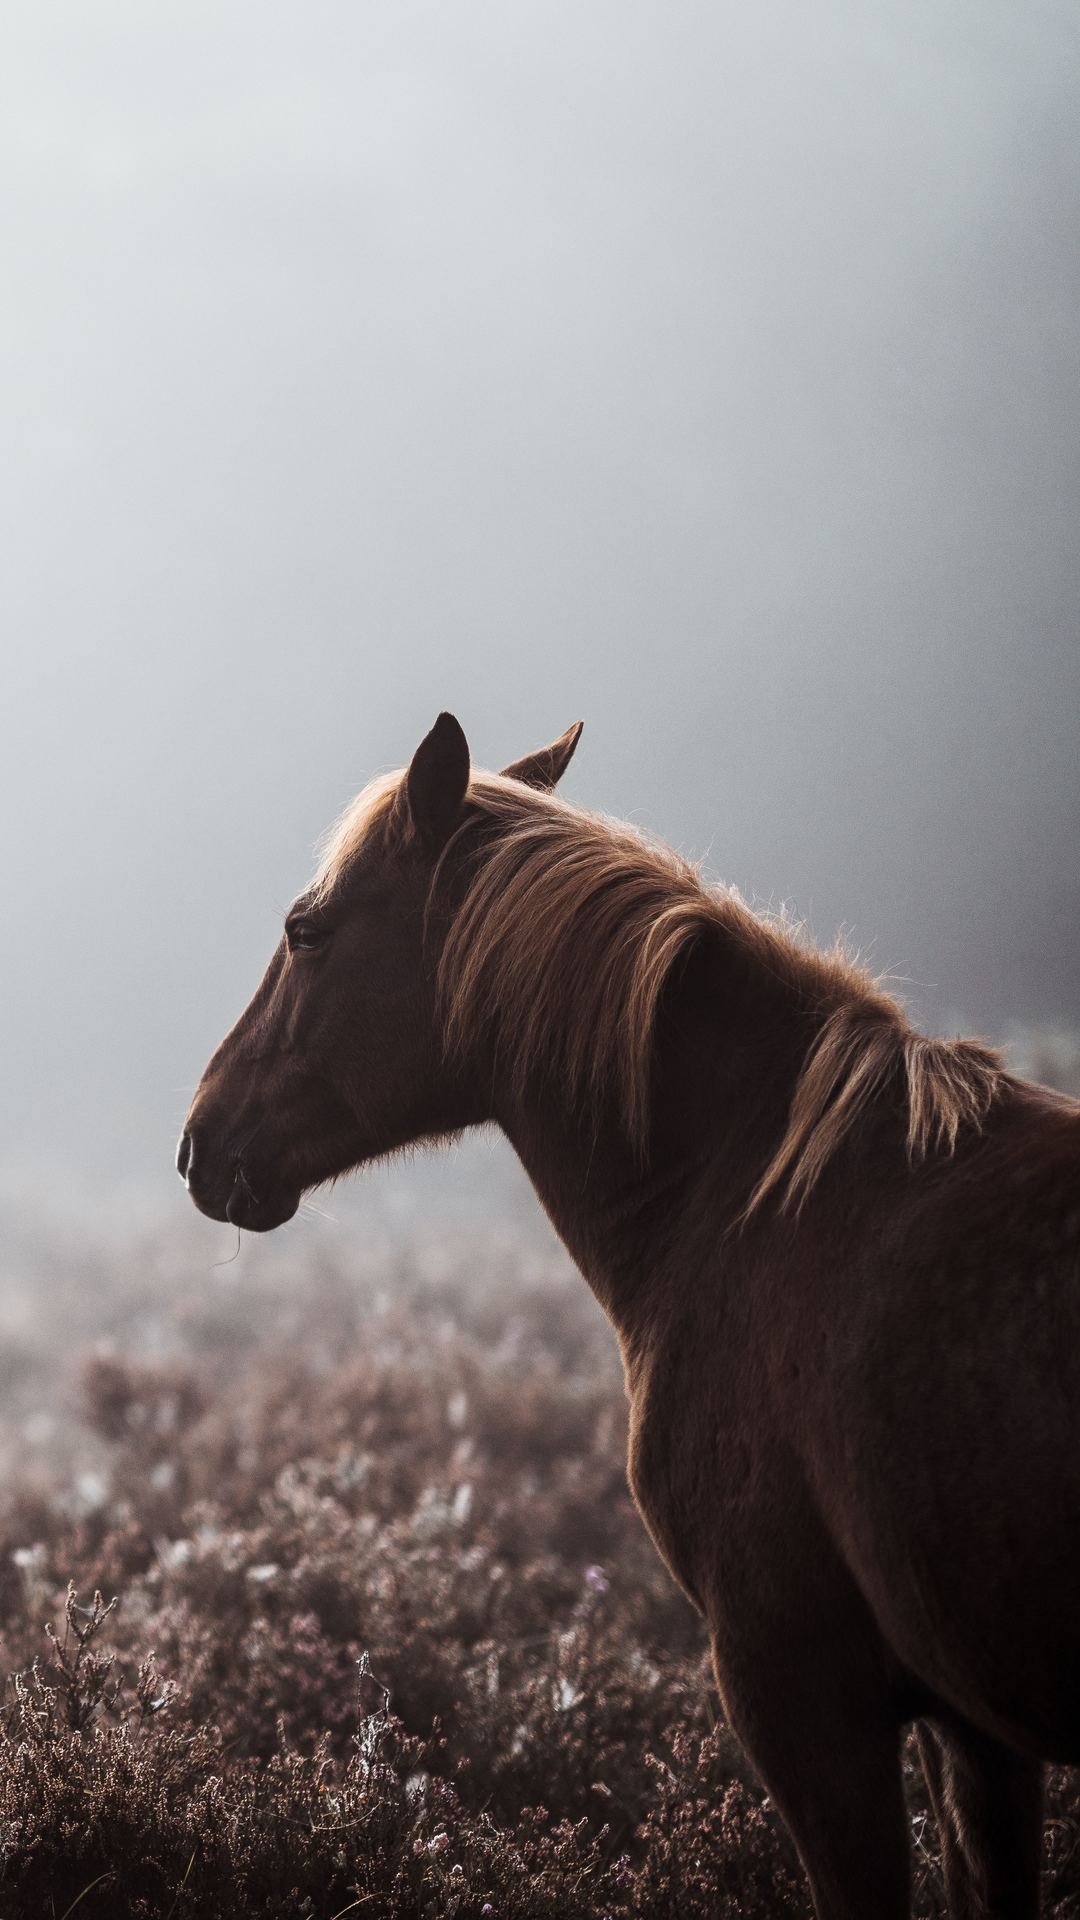 Brown Horse With Baby Horse With Background Of Fog 4K 5K HD Horse Wallpapers   HD Wallpapers  ID 56804